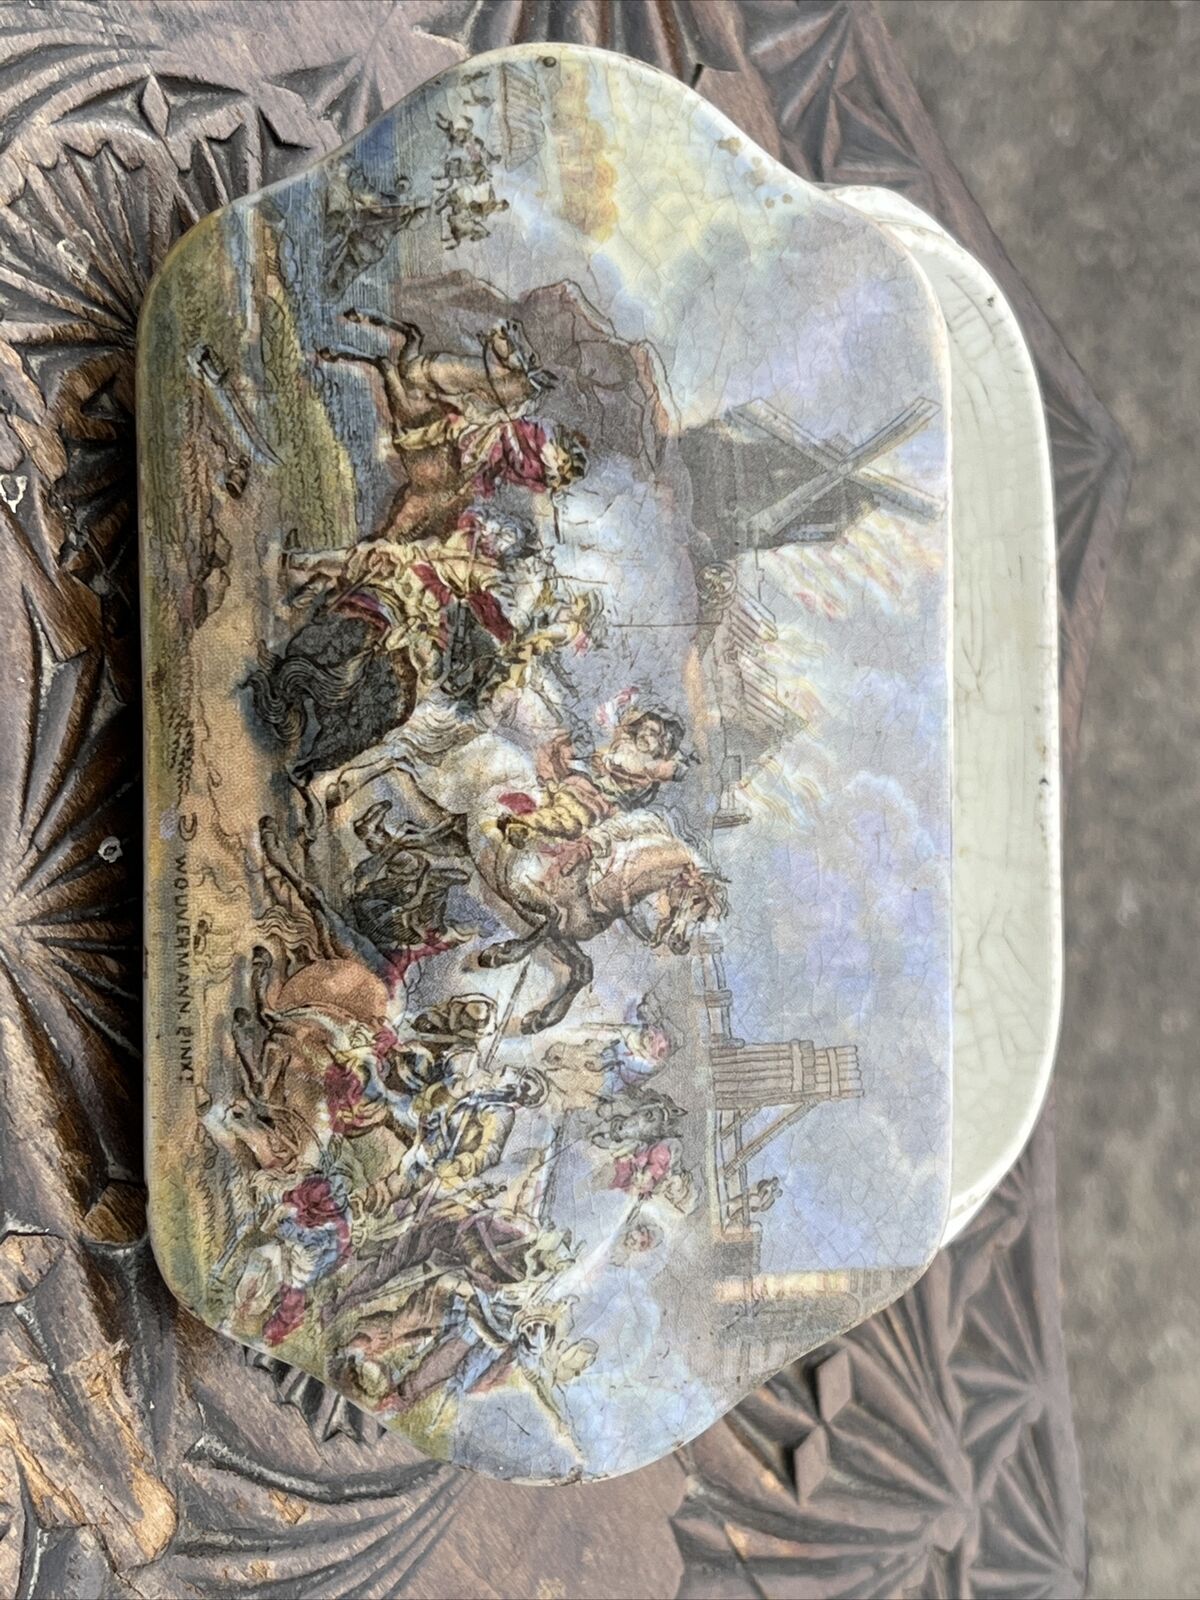 Battle Scene Porcelain Box Decoration Of A Painting after Philips Wouwerman